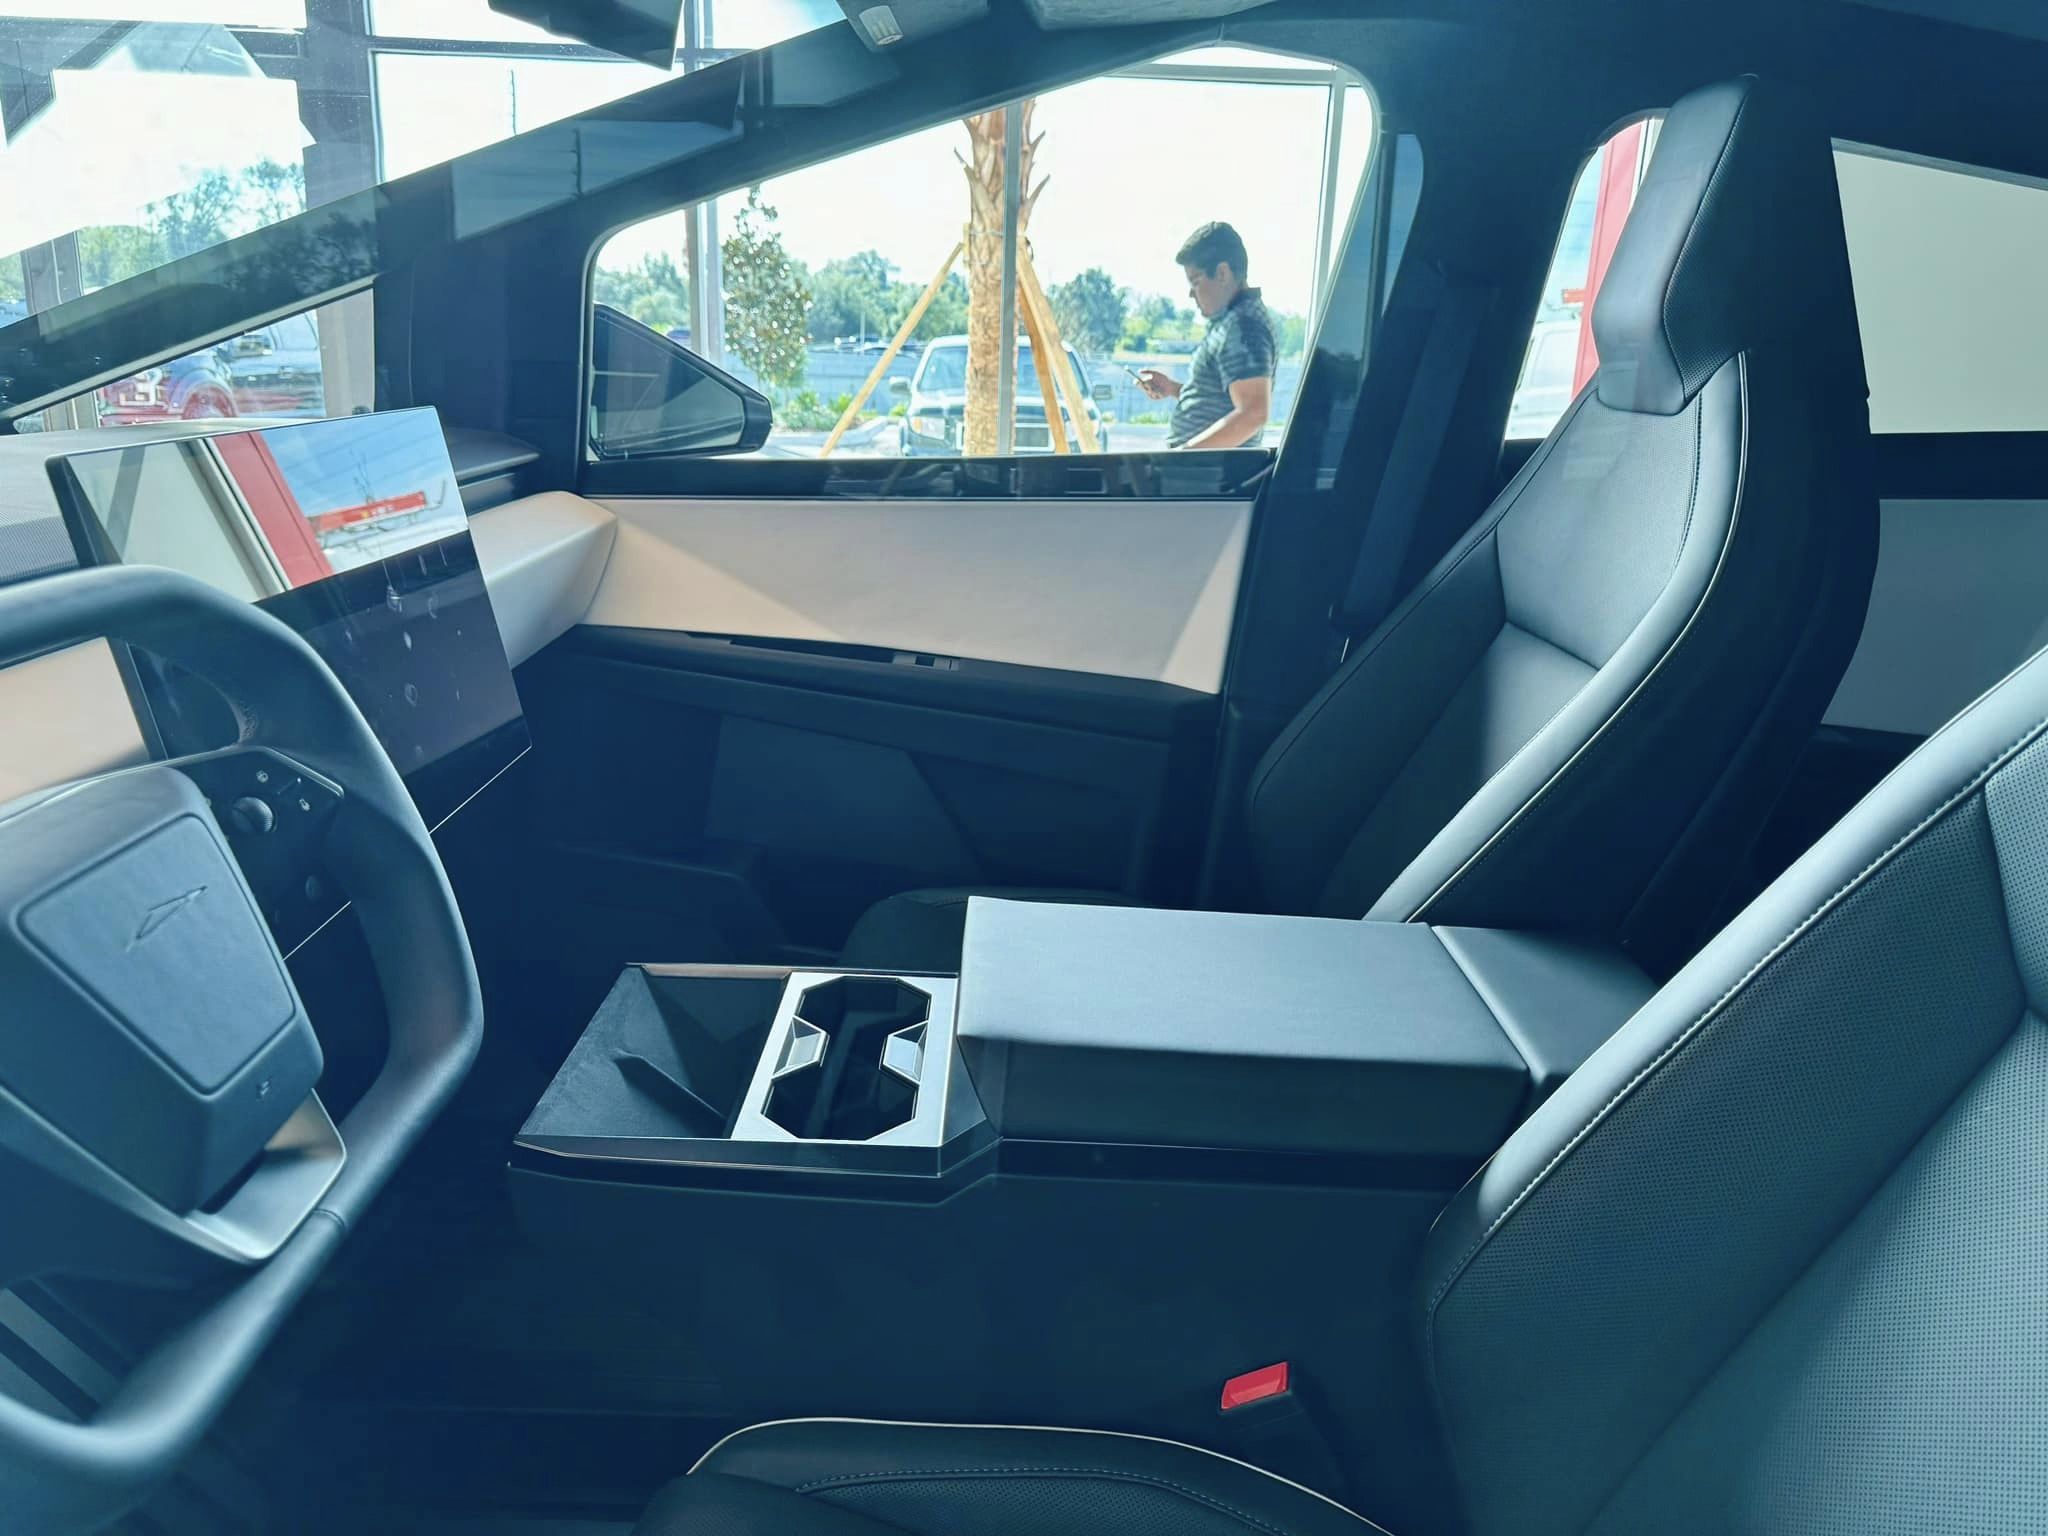 Tesla Cybertruck A Cybertruck appears at just-opened Clermont Florida Tesla Store / Service Center! 701287_10230402820830345_6454182493124491355_n-